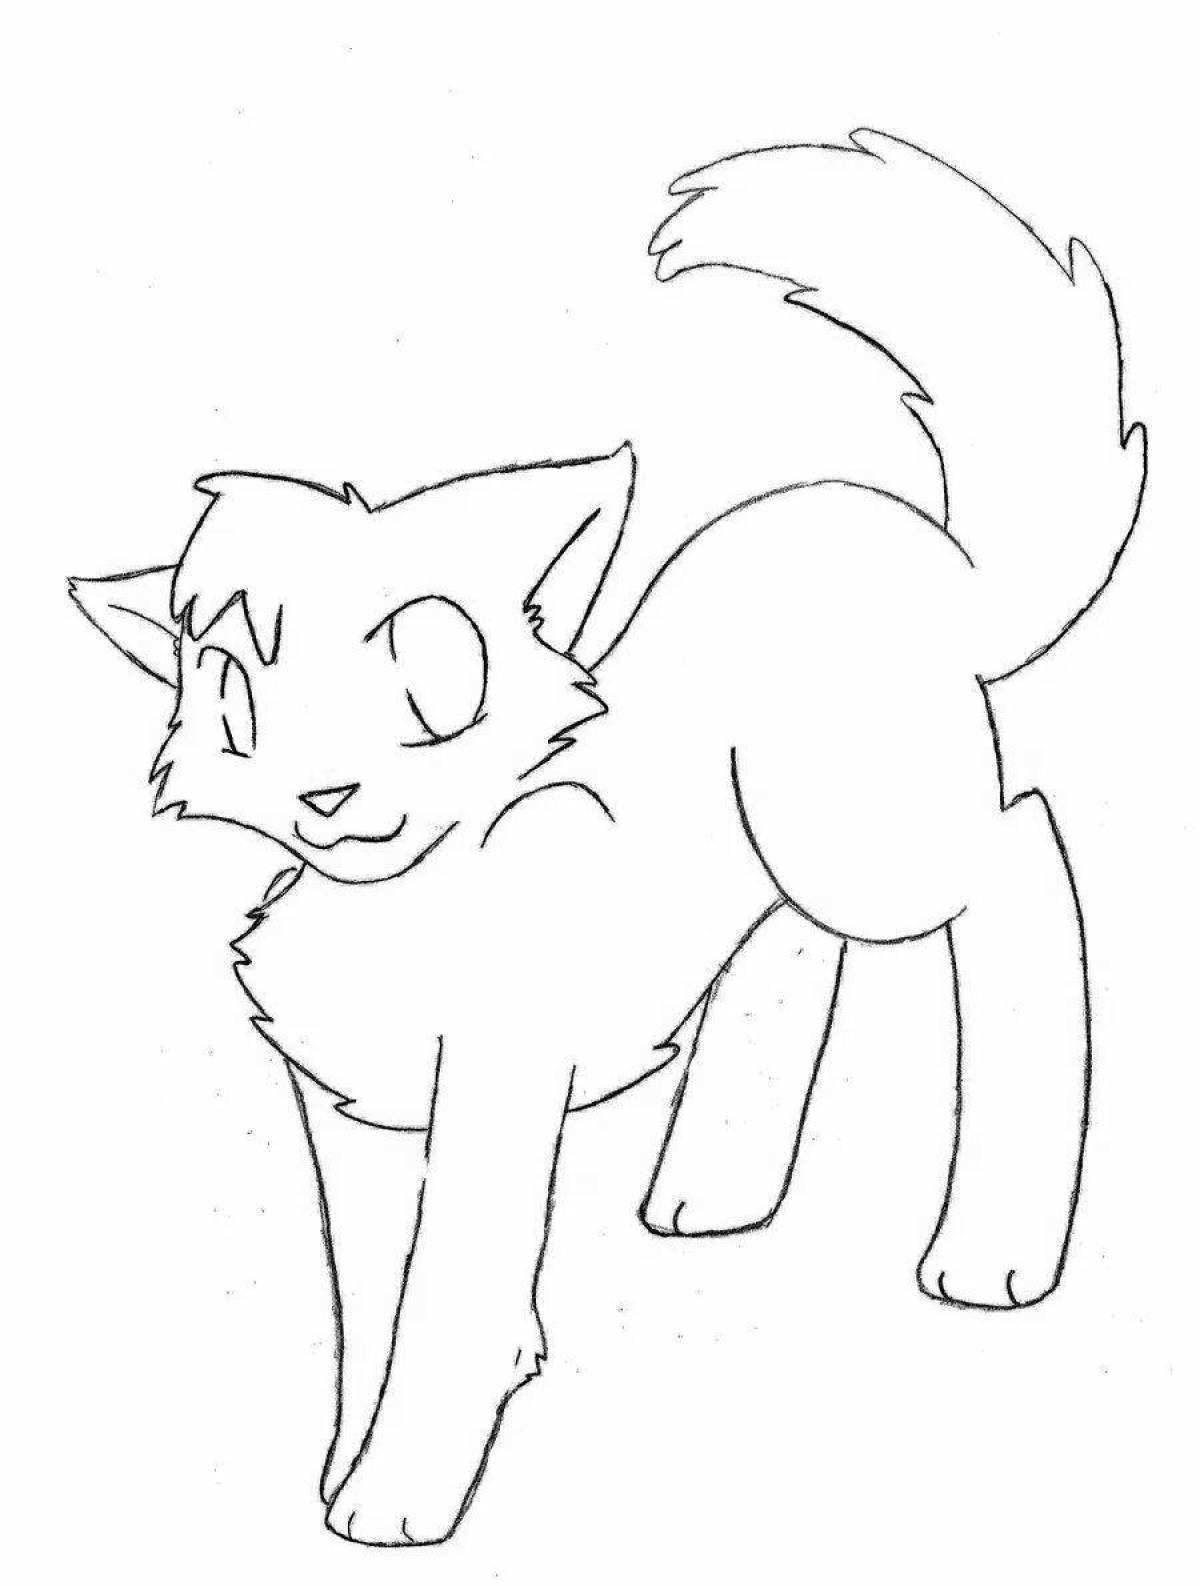 Coloring page grinning beach cat